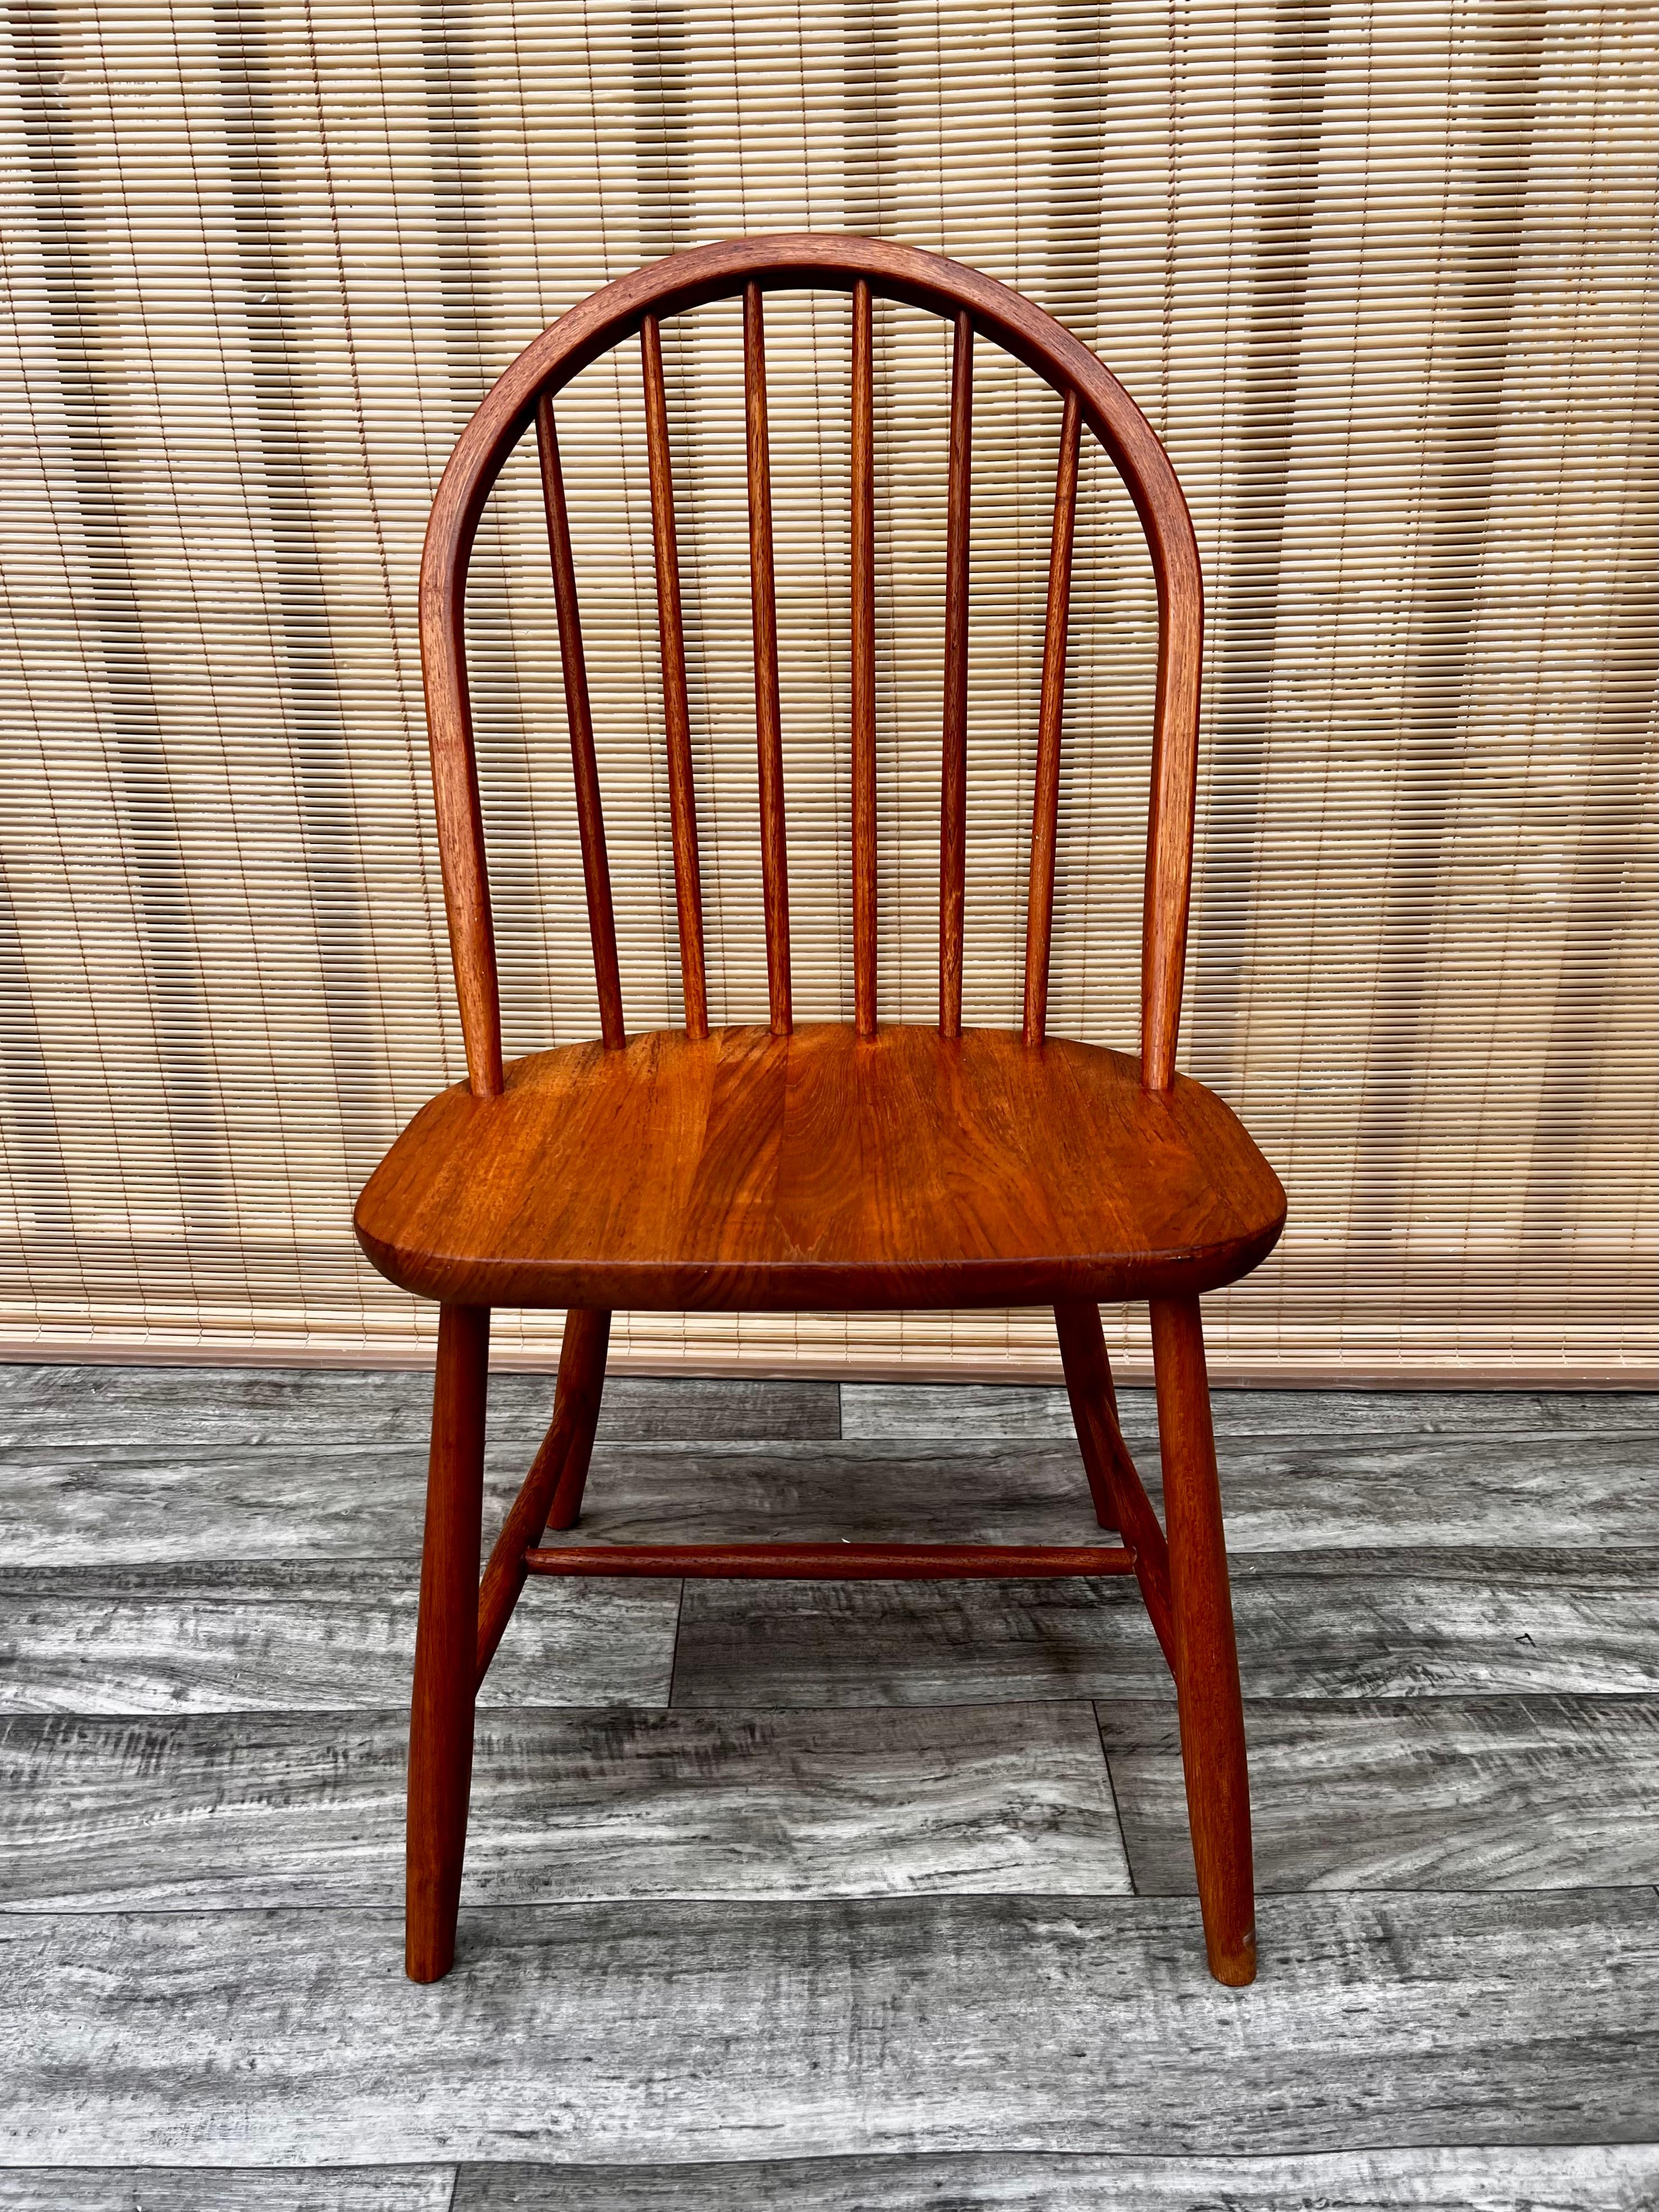 Set of 4 Midcentury Danish Modern Teak Dining Chairs by Tarm Stole Mobelfabrik In Good Condition For Sale In Miami, FL